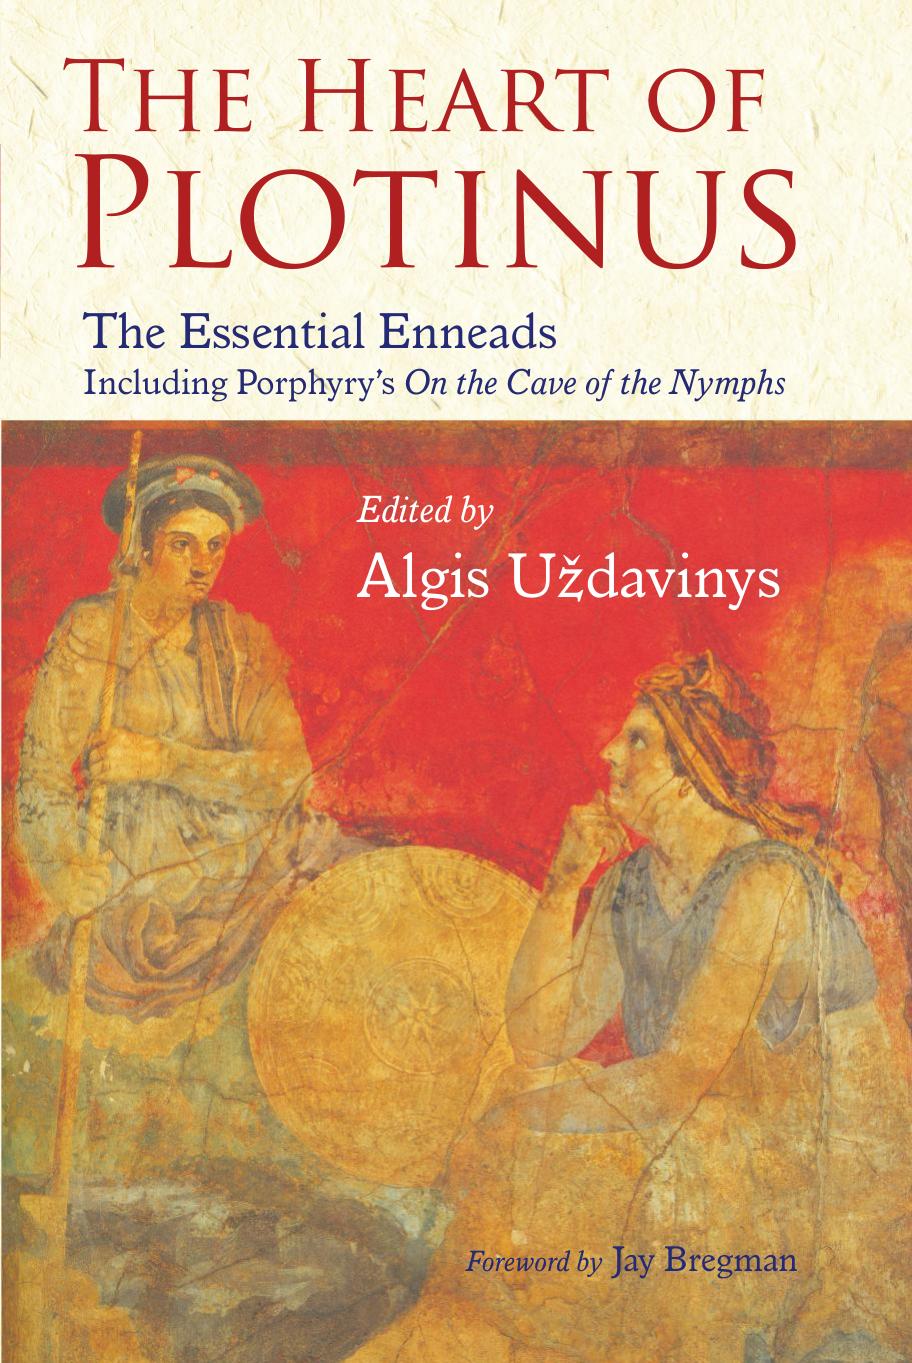 The Heart of Plotinus: The Essential Eneads Including Porphyry's on the Cave of the Nymphs